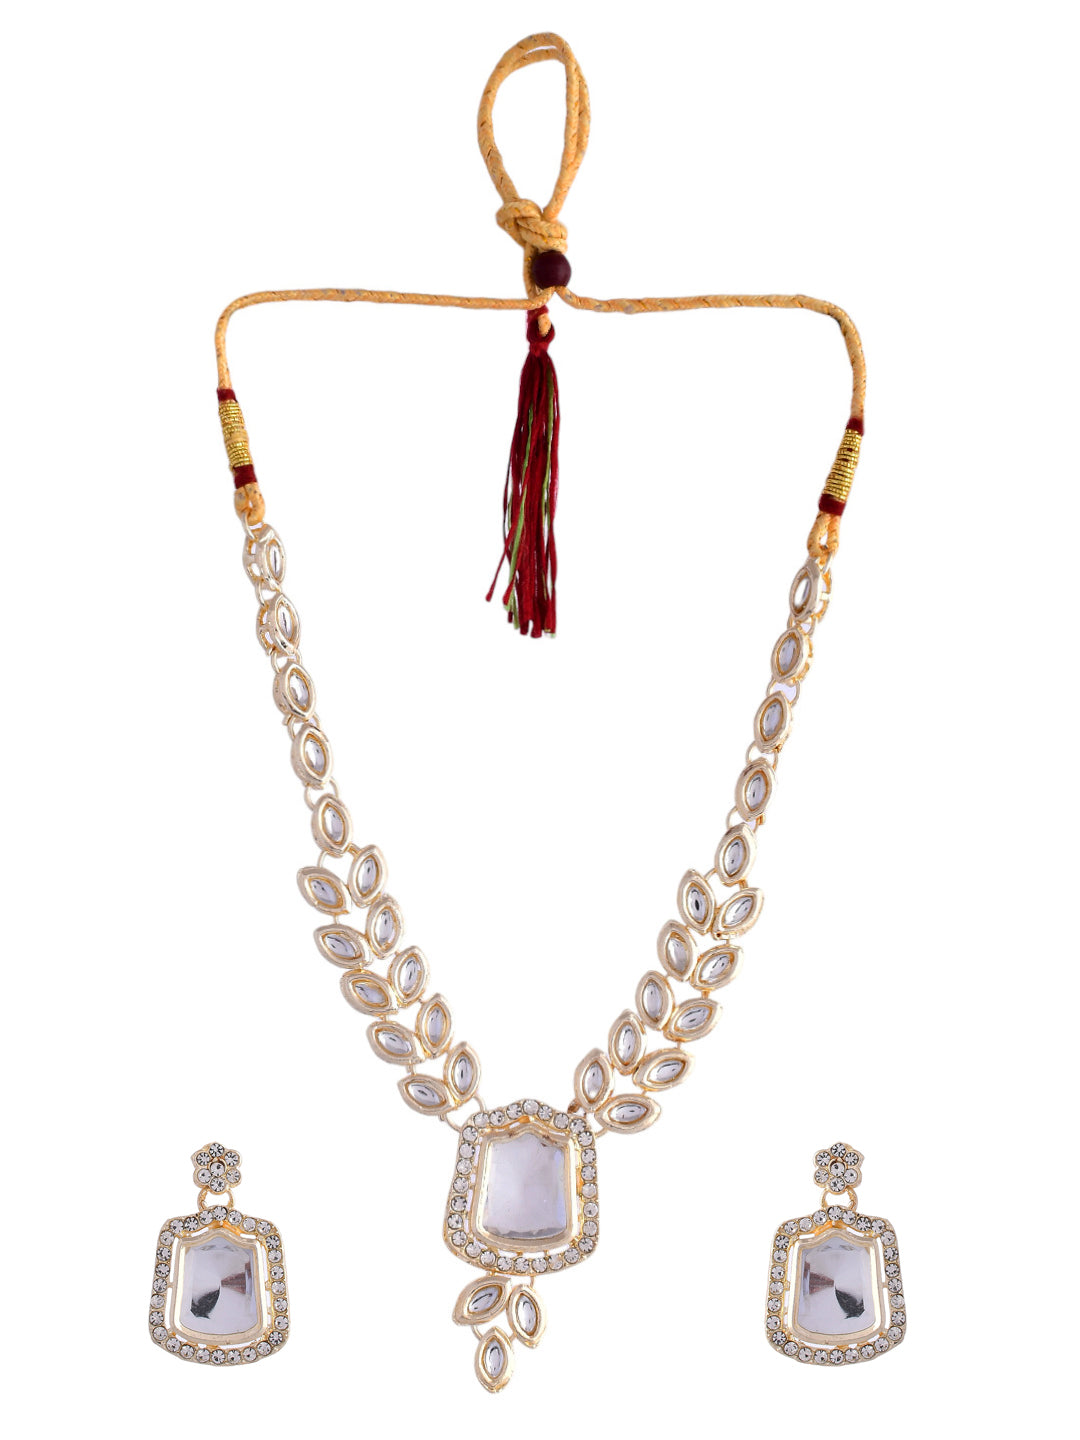 Women's Handcrafted White Kundan Necklace And Earrings Set - Voj